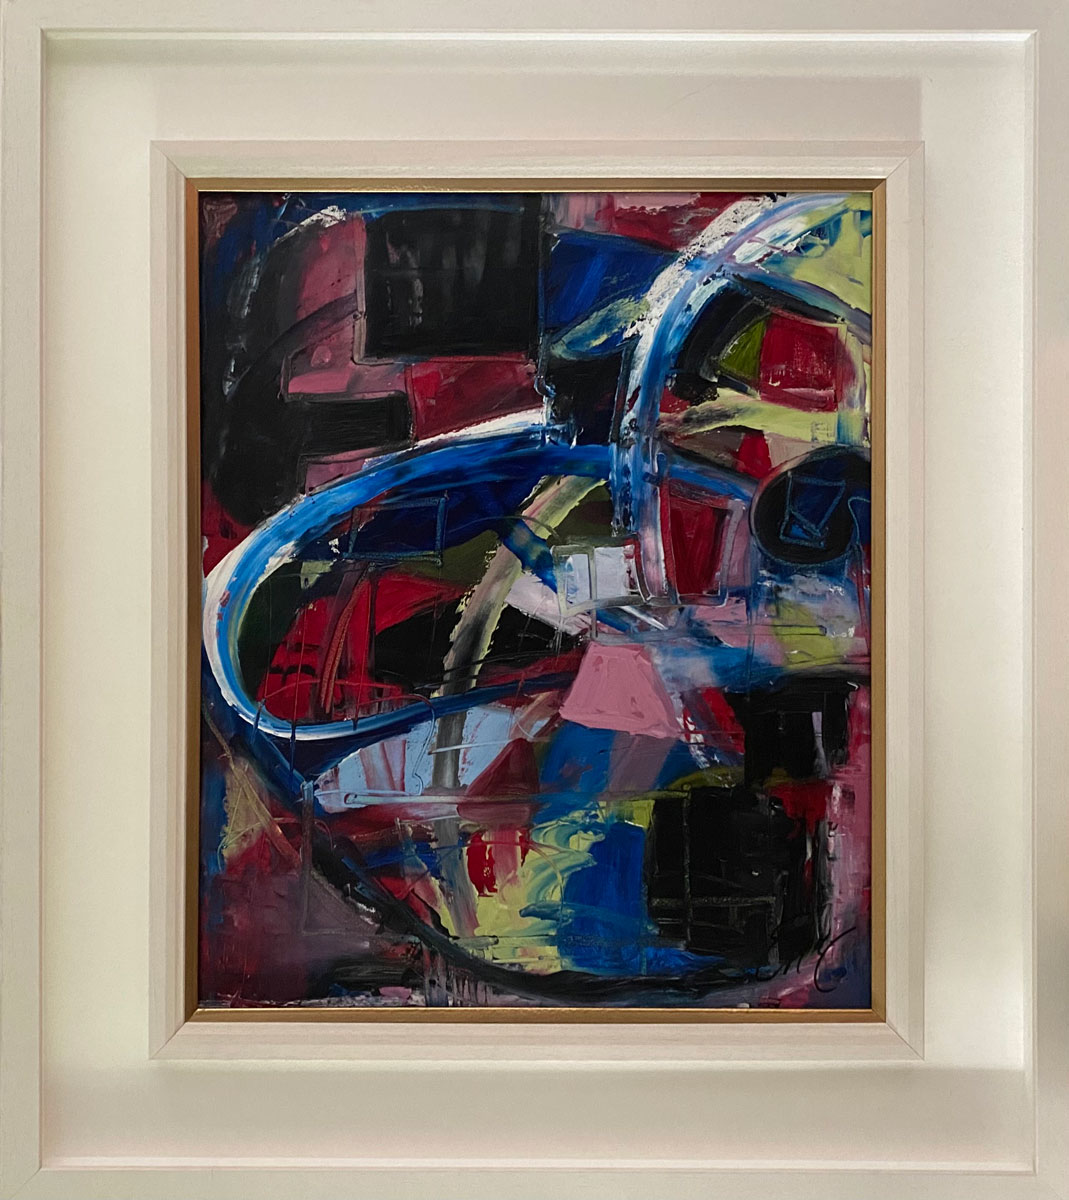 A SWIRAL AND RIOT OF PINKS, BLUES AND BLACKS - Original Abstract Oil Painting